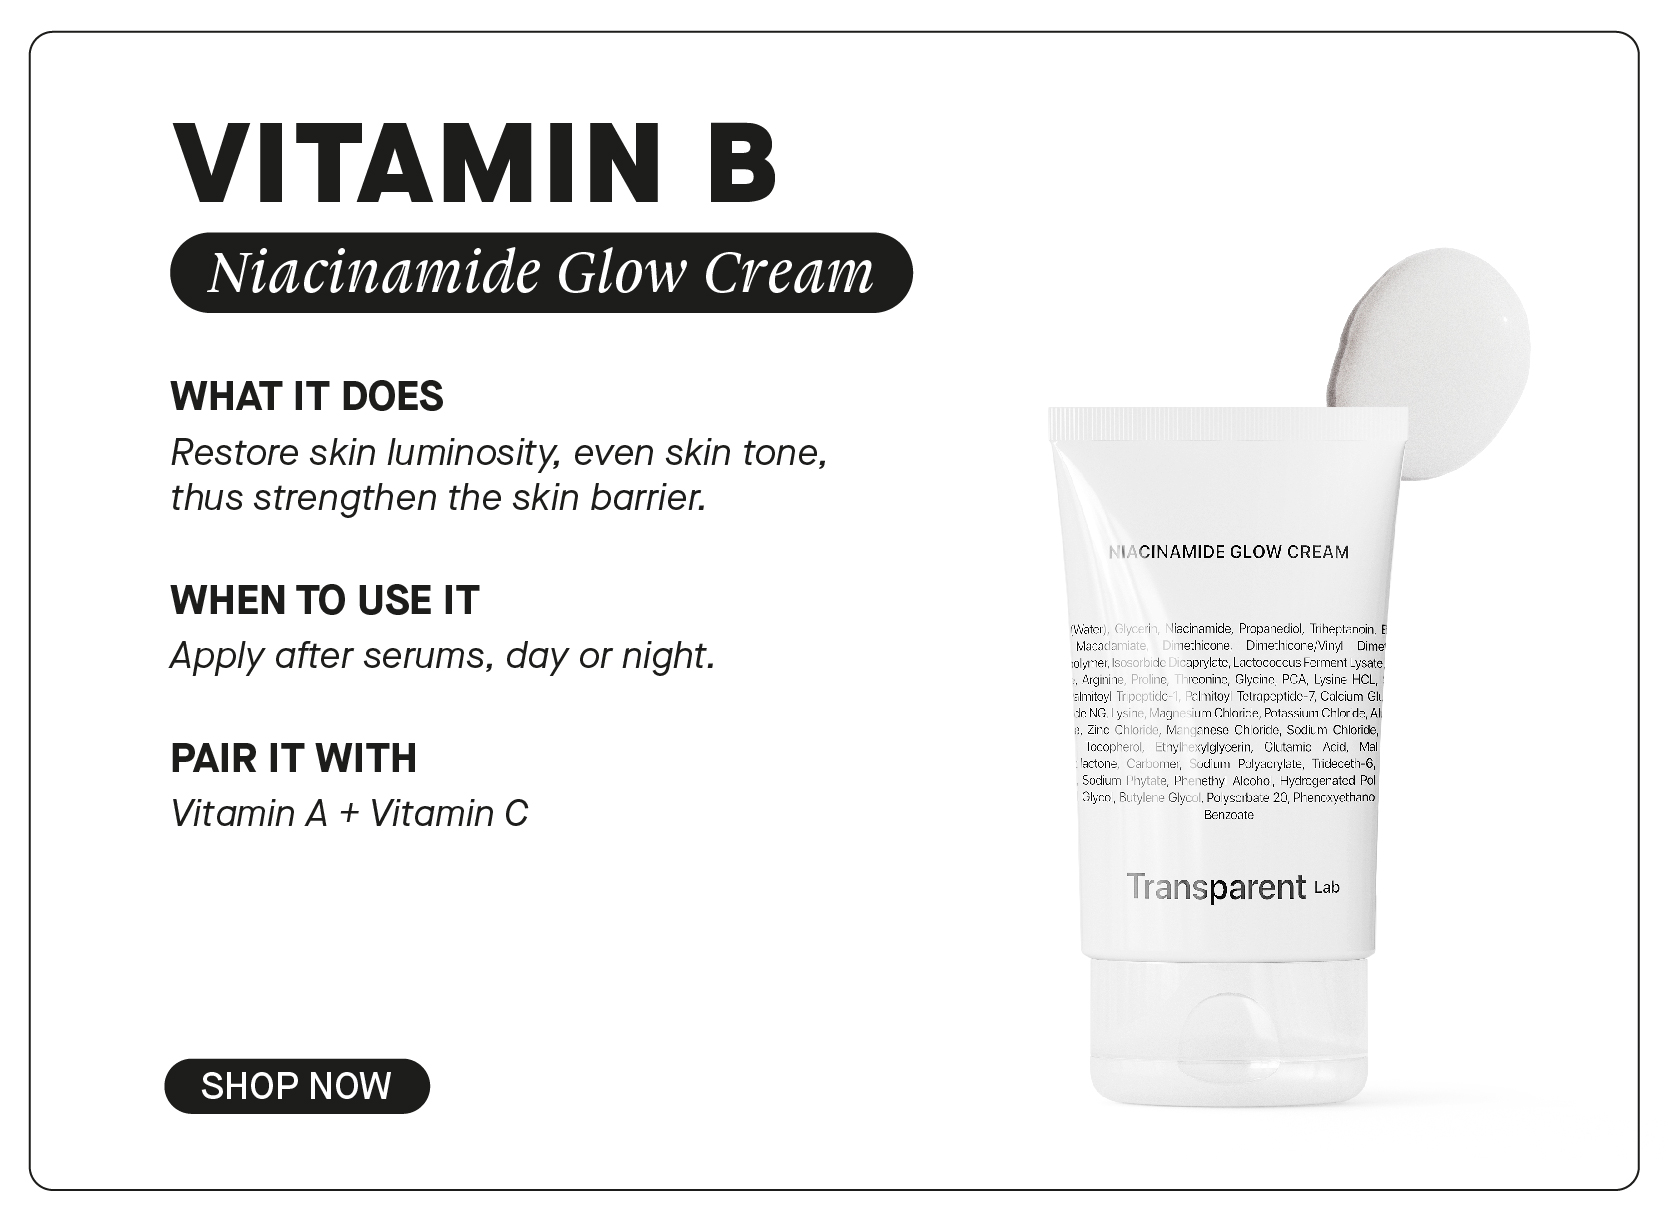  VITAMIN B WHAT IT DOES Restore skin luminosity, even skin tone, thus strengthen the skin barrier. 1 CINAMIDE GLOW CREAM WHEN TO USE IT Apply after serums, day or night. i1 lisciramicls, Propatediol, Tiheptenoin, techicore. - Dimechicore;Vin Dimer PAIR IT WITH : Vitamin A Vitamin C o oo Ry ransparent L SHOP NOW 